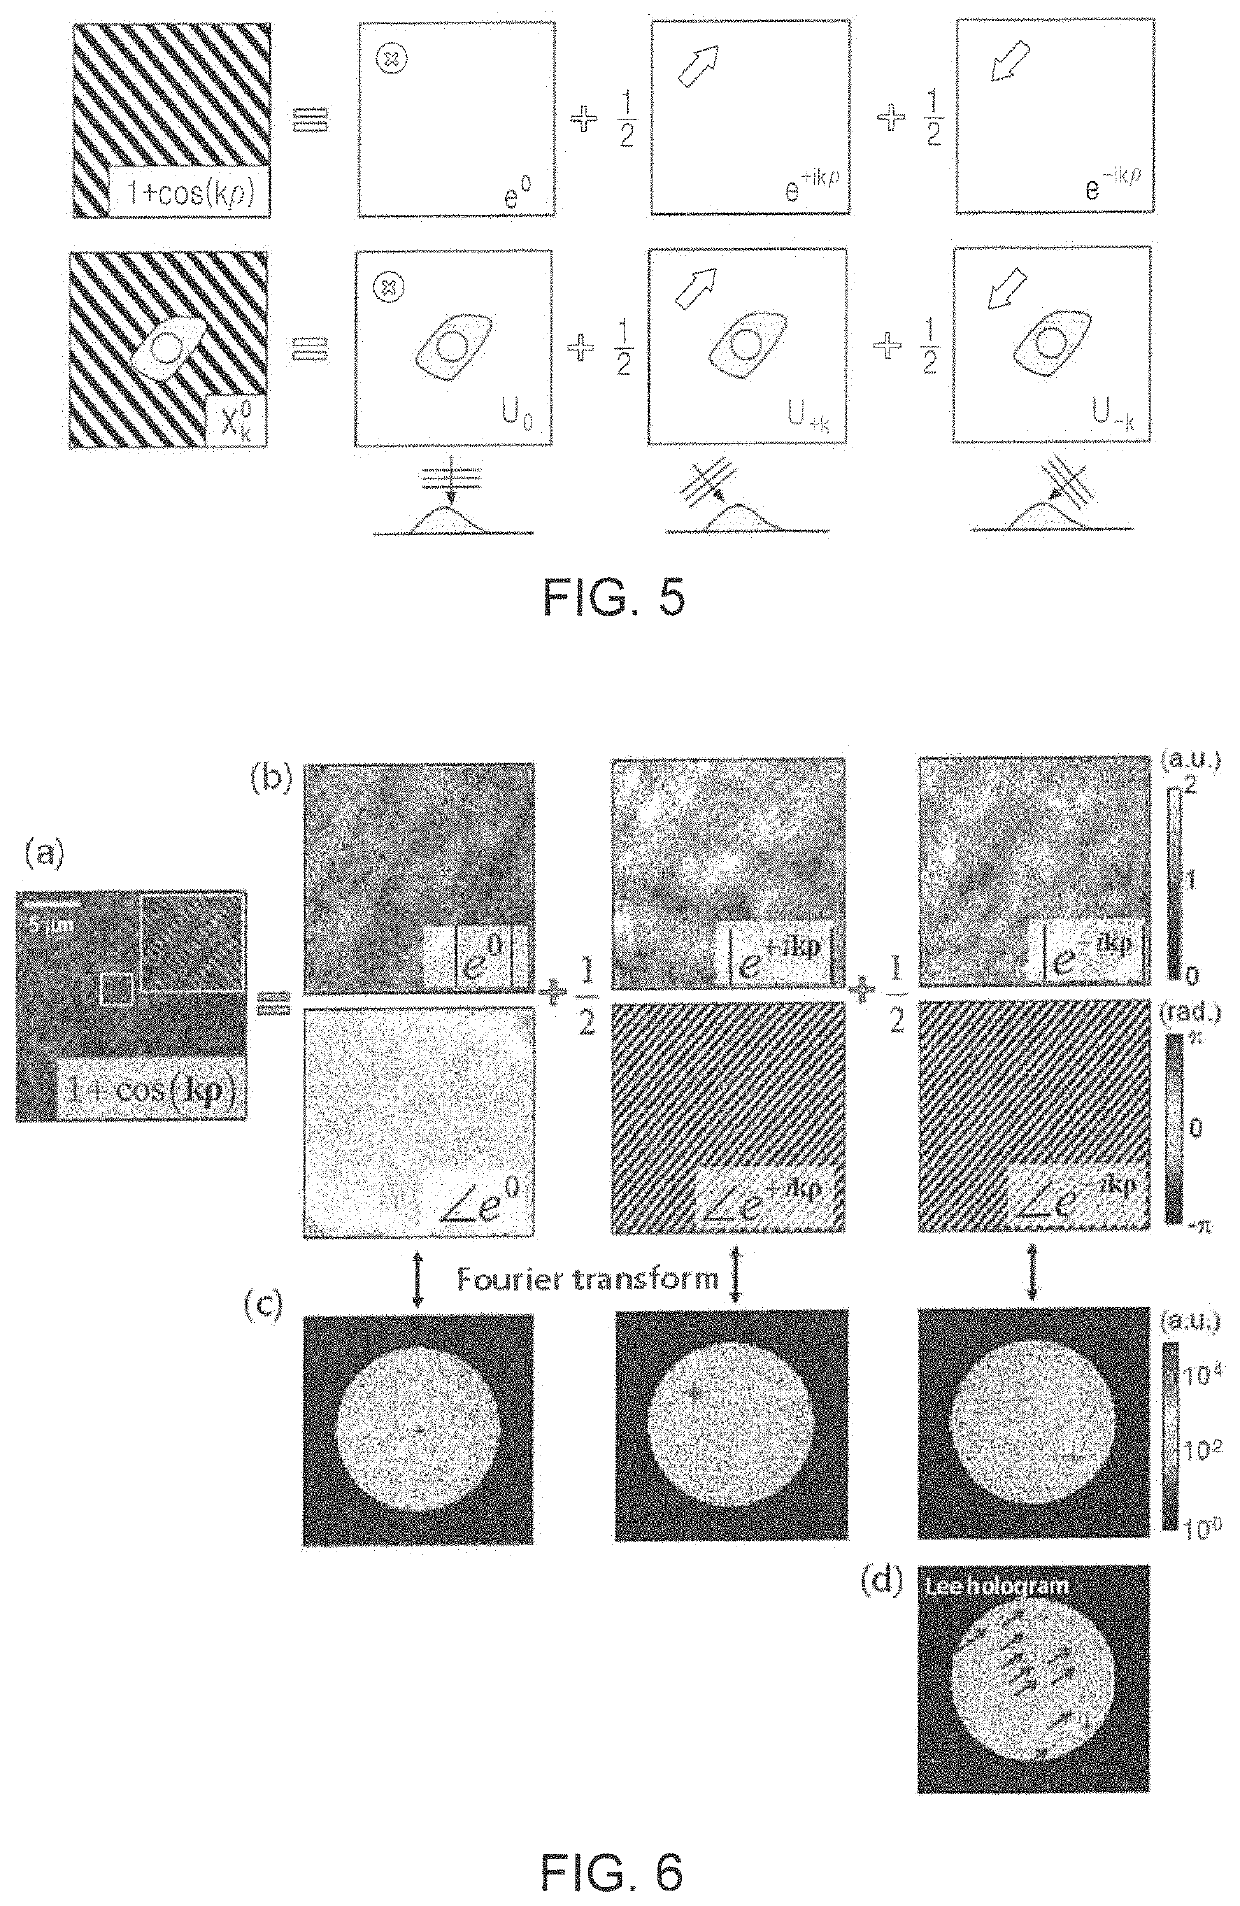 Structured illumination microscopy system using digital micromirror device and time-complex structured illumination, and operation method therefor